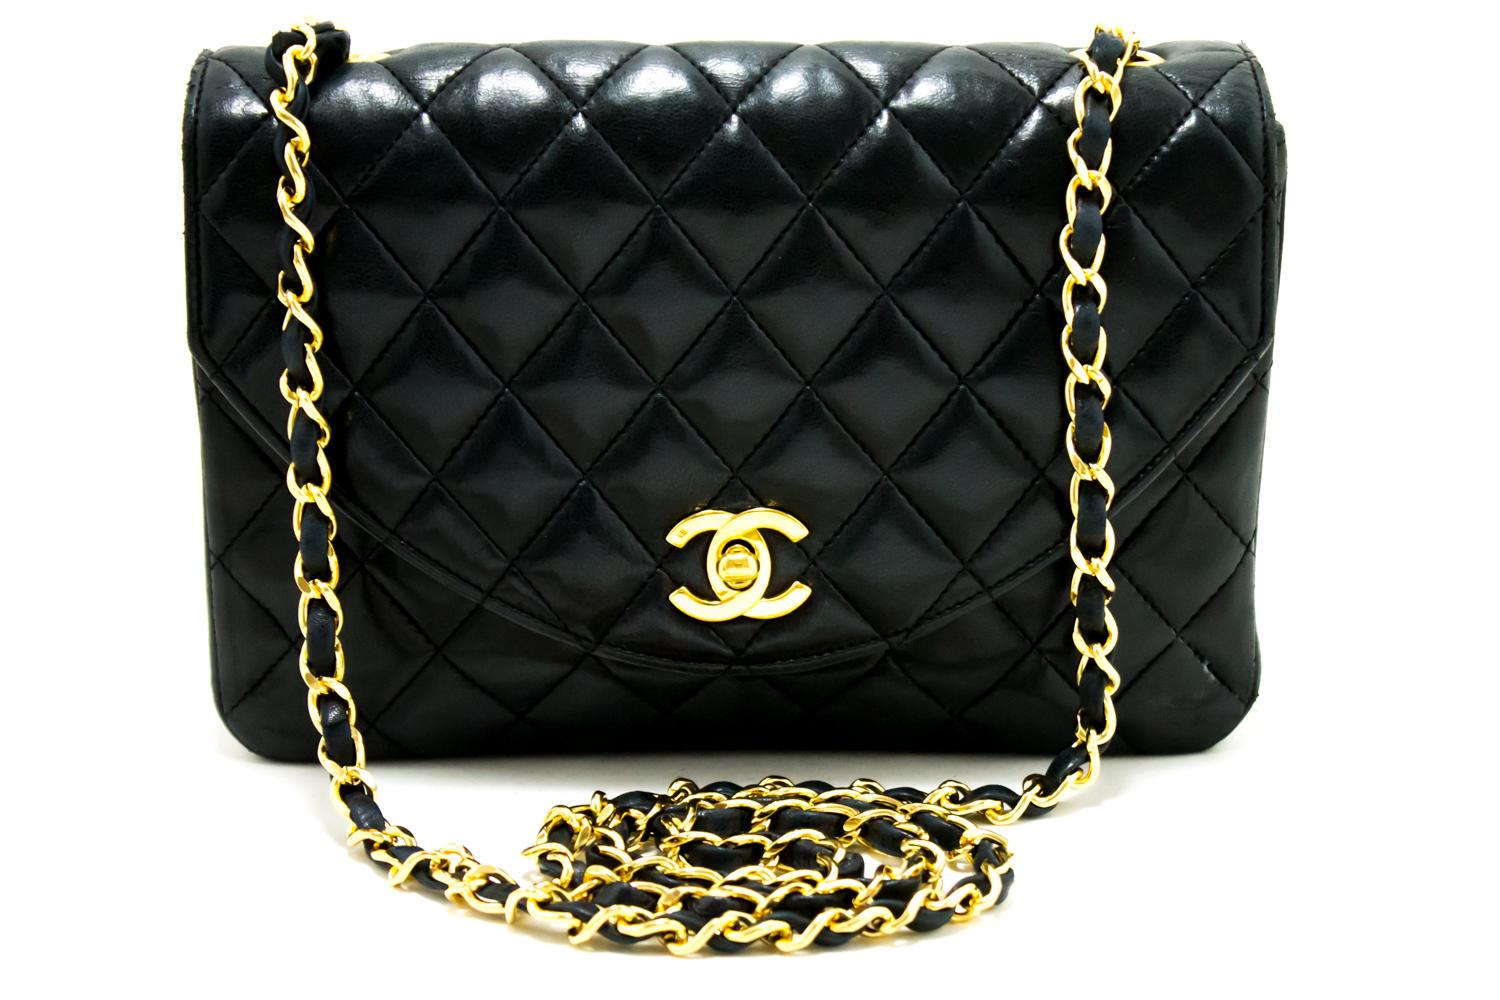 An authentic CHANEL Half Moon Chain Shoulder Bag Crossbody Black Quilted Flap. The color is Black. The outside material is Leather. The pattern is Solid.
Conditions & Ratings
Outside material: Lambskin
Color: Black
Closure: Turnlock
Hardware and